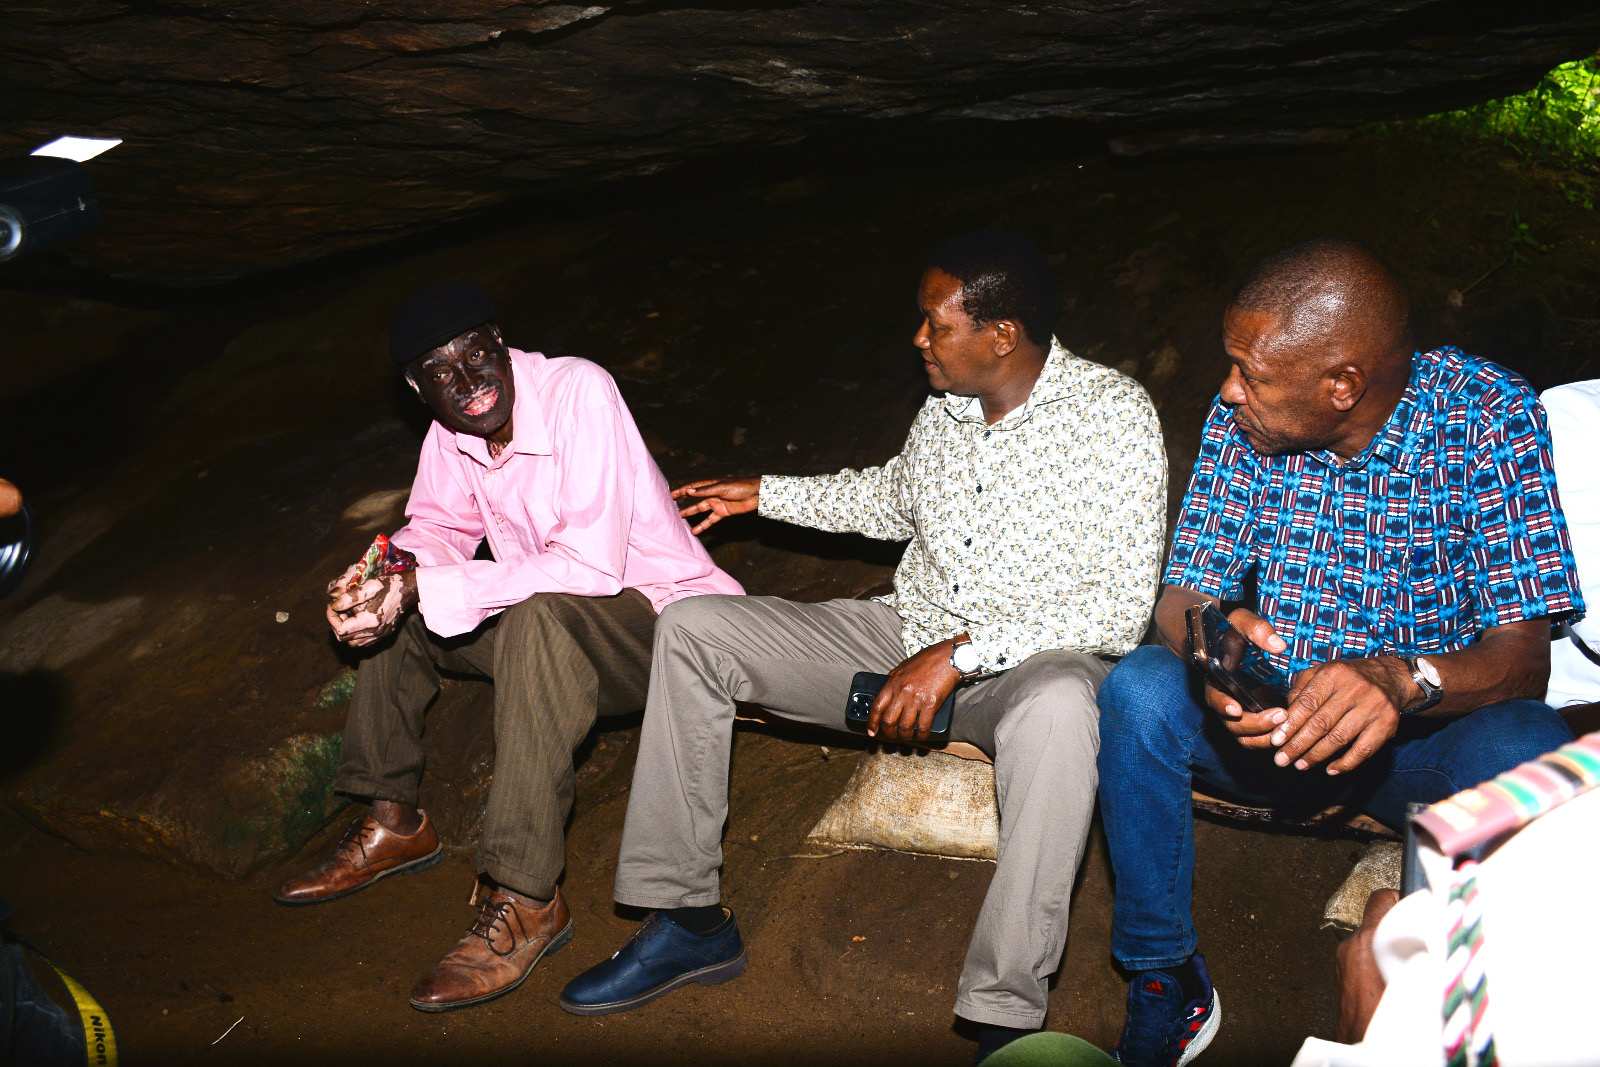 The Cabinet Secretary, Ministry of Tourism and Wildlife, Dr. Alfred Mutua (centre), and the Governor of Taita Taveta, H.E. Andrew Mwadime (right), during their visit at Jomo Kenyatta Caves, in Wundanyi.